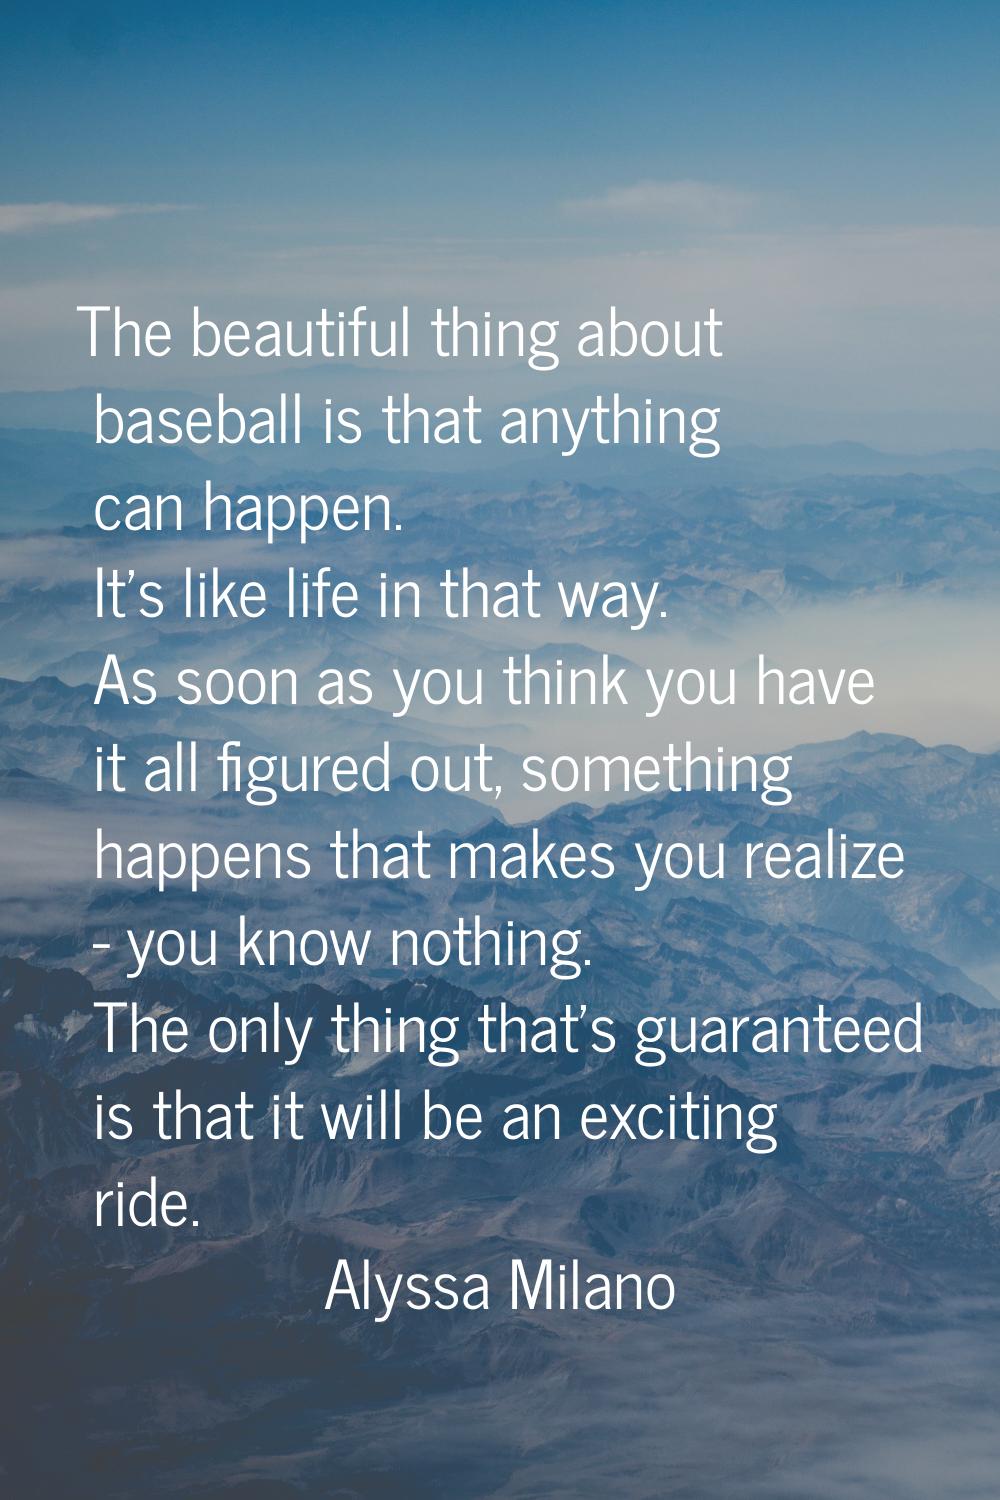 The beautiful thing about baseball is that anything can happen. It's like life in that way. As soon